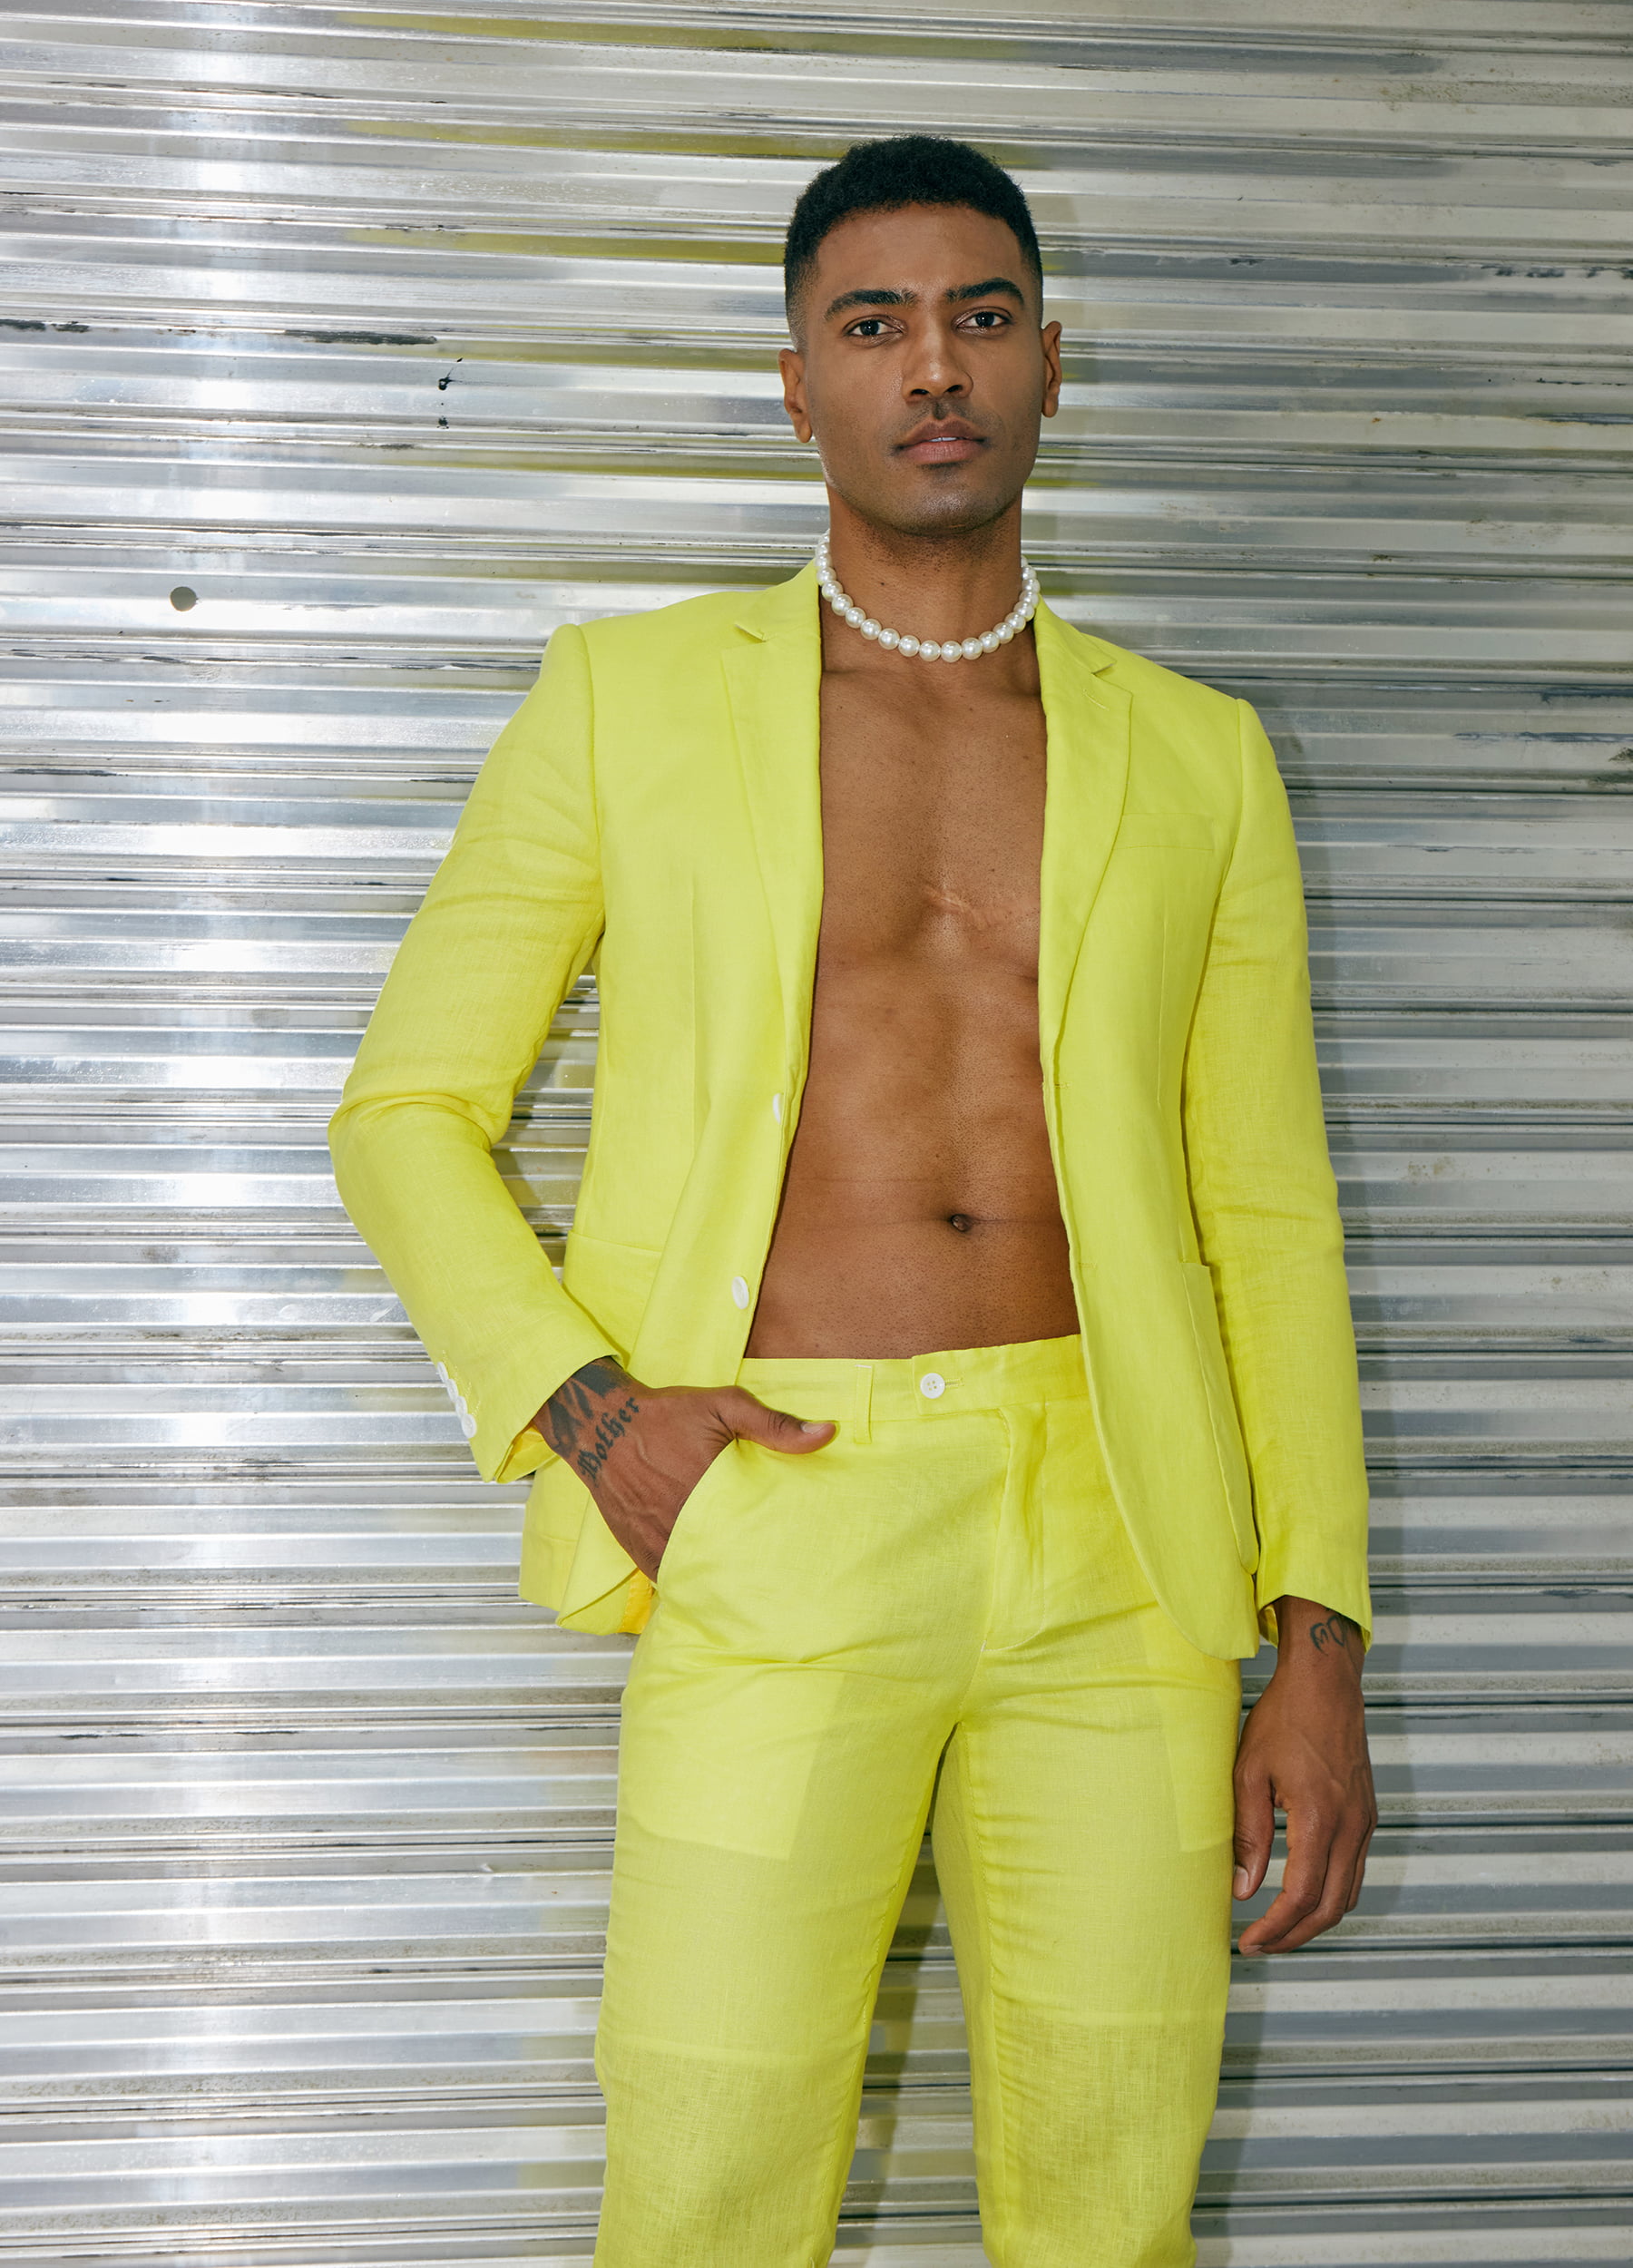 Double breasted yellow suit with black buttons: Jacket and Pants - C2090